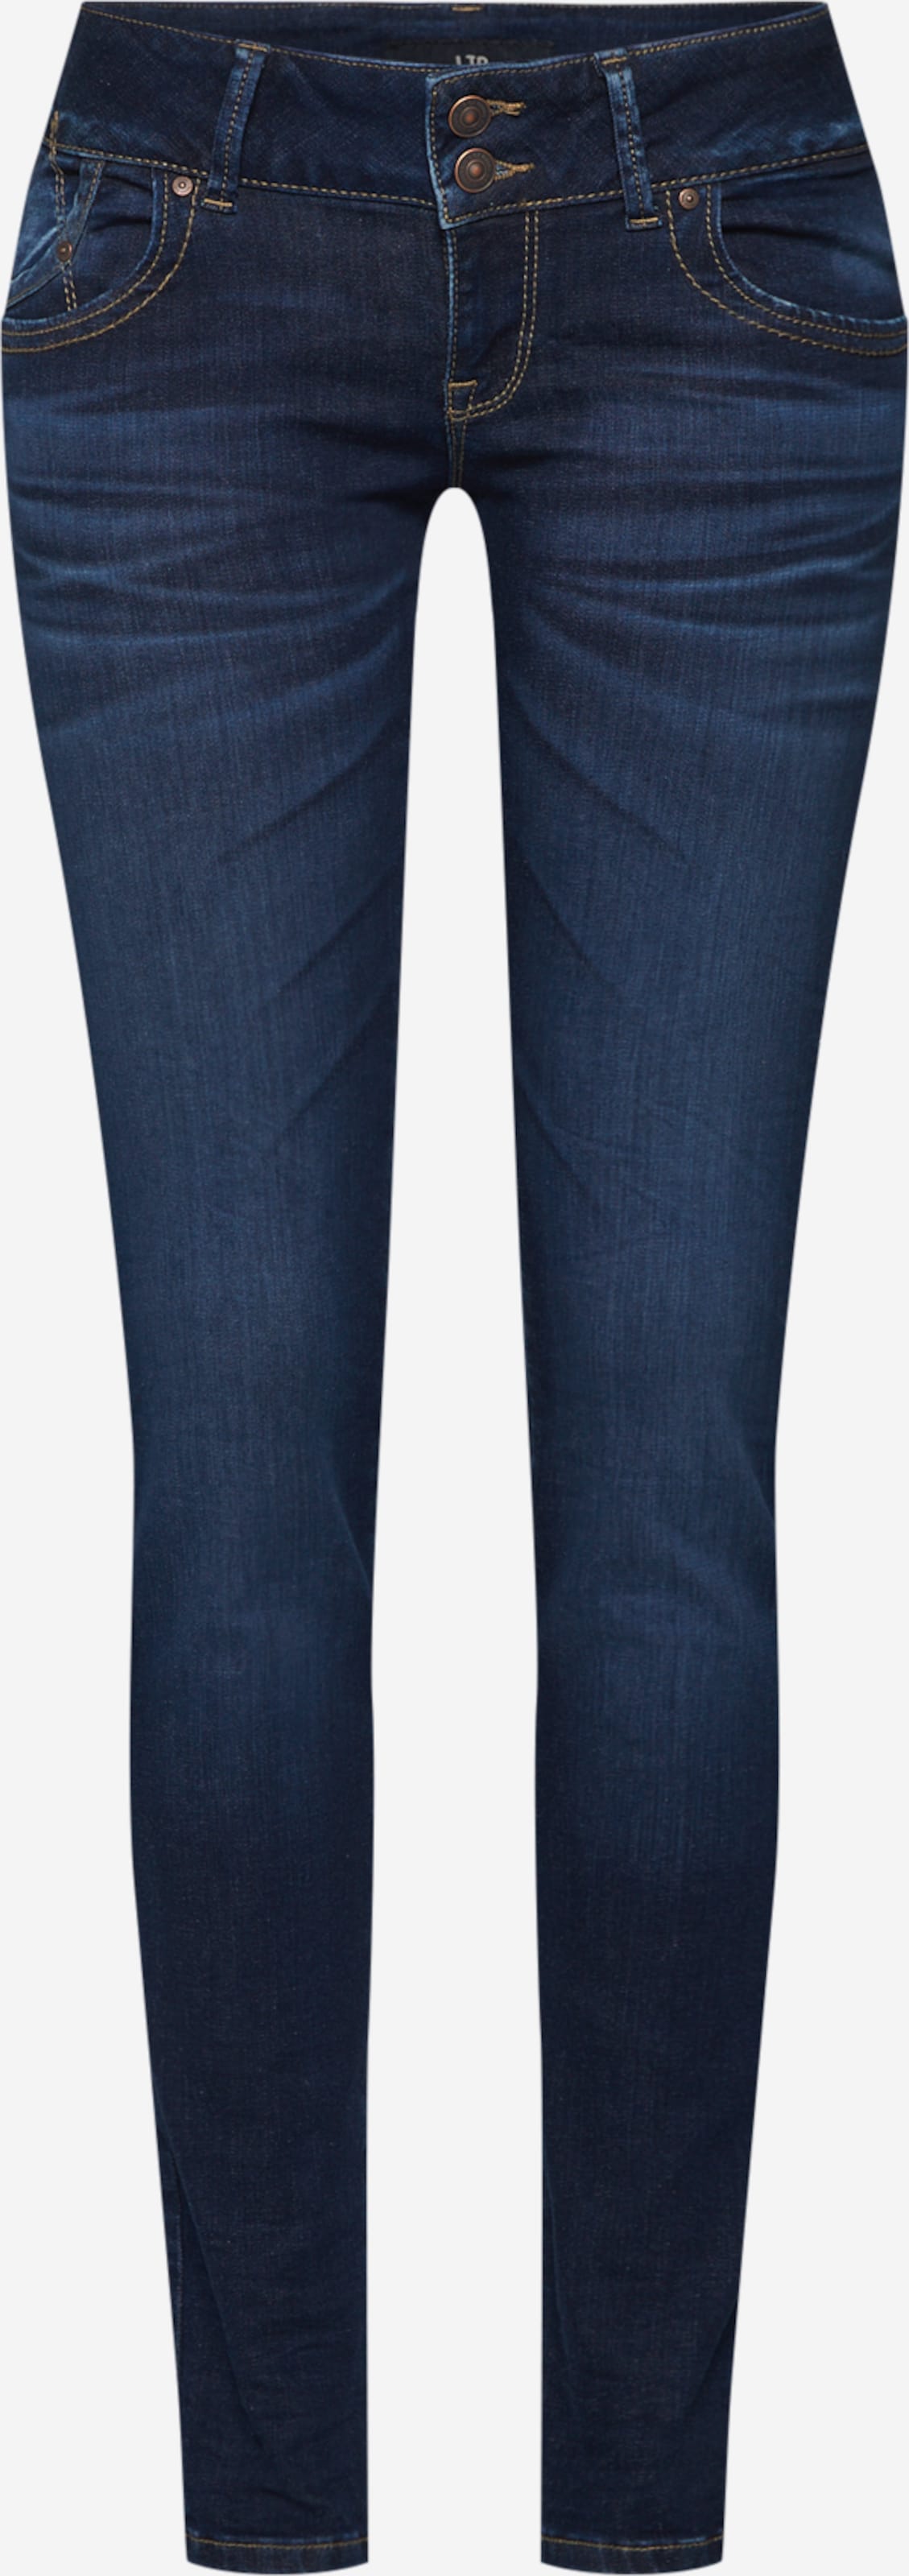 Dijk Conflict Snor LTB Skinny Jeans 'Molly' in Blauw | ABOUT YOU